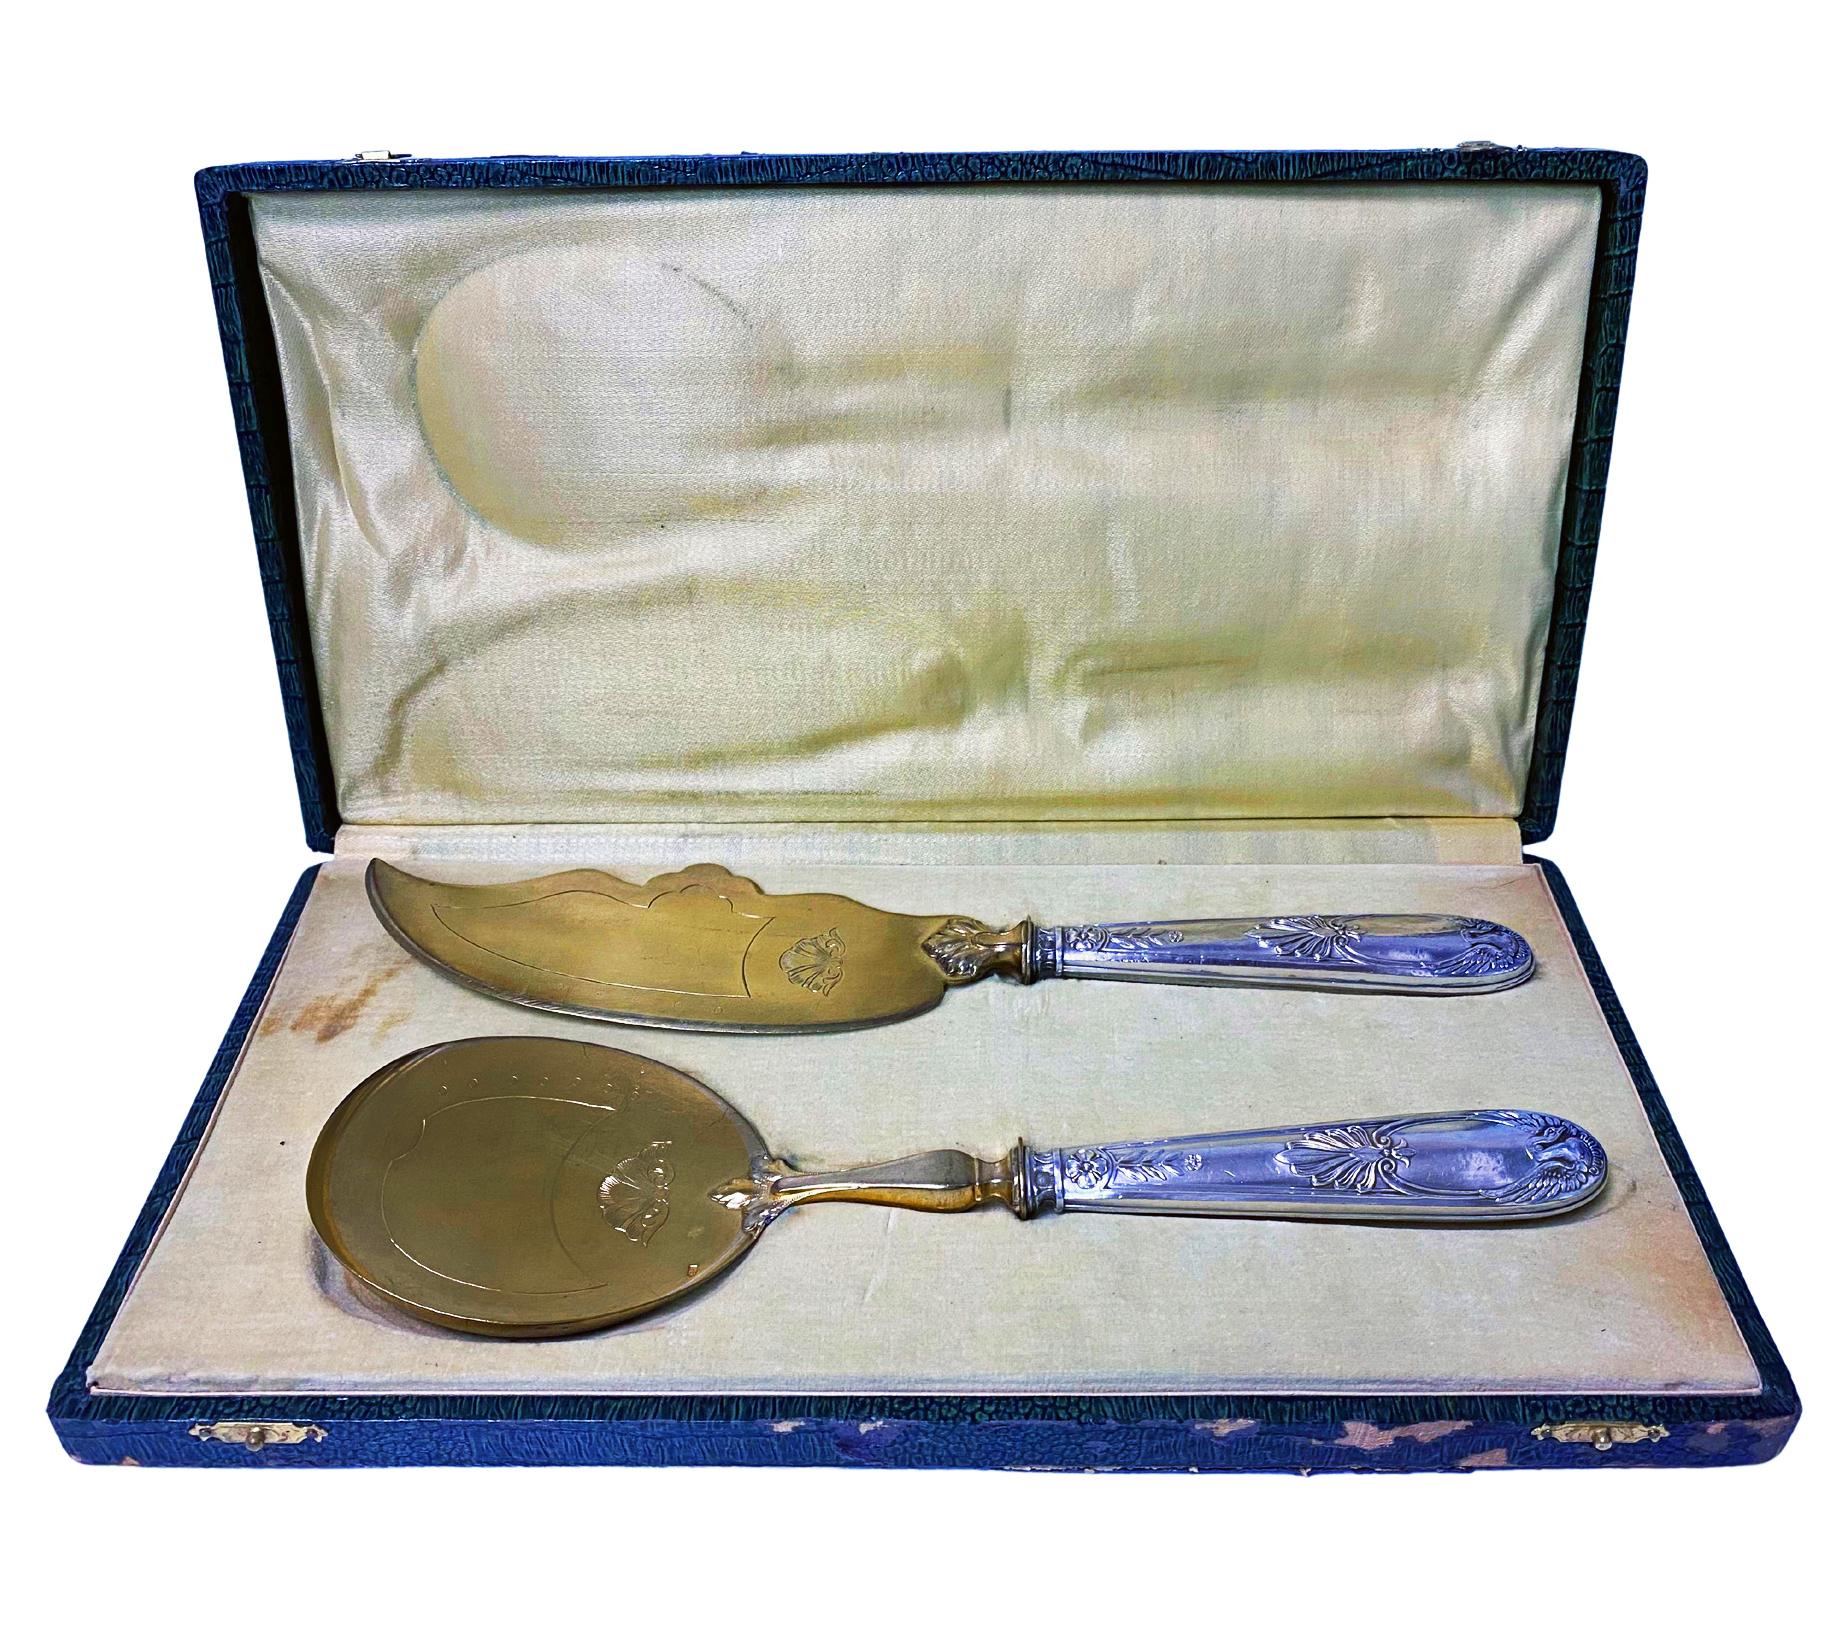 Boxed Pair French 1st standard Silver (.950) Fruit and Cake Servers C.1920. Unusual swan amidst foliate design silver handles with vermeil on white metal spade and slice. French silver and blanc metal marks for Robert Louis of Paris who was active